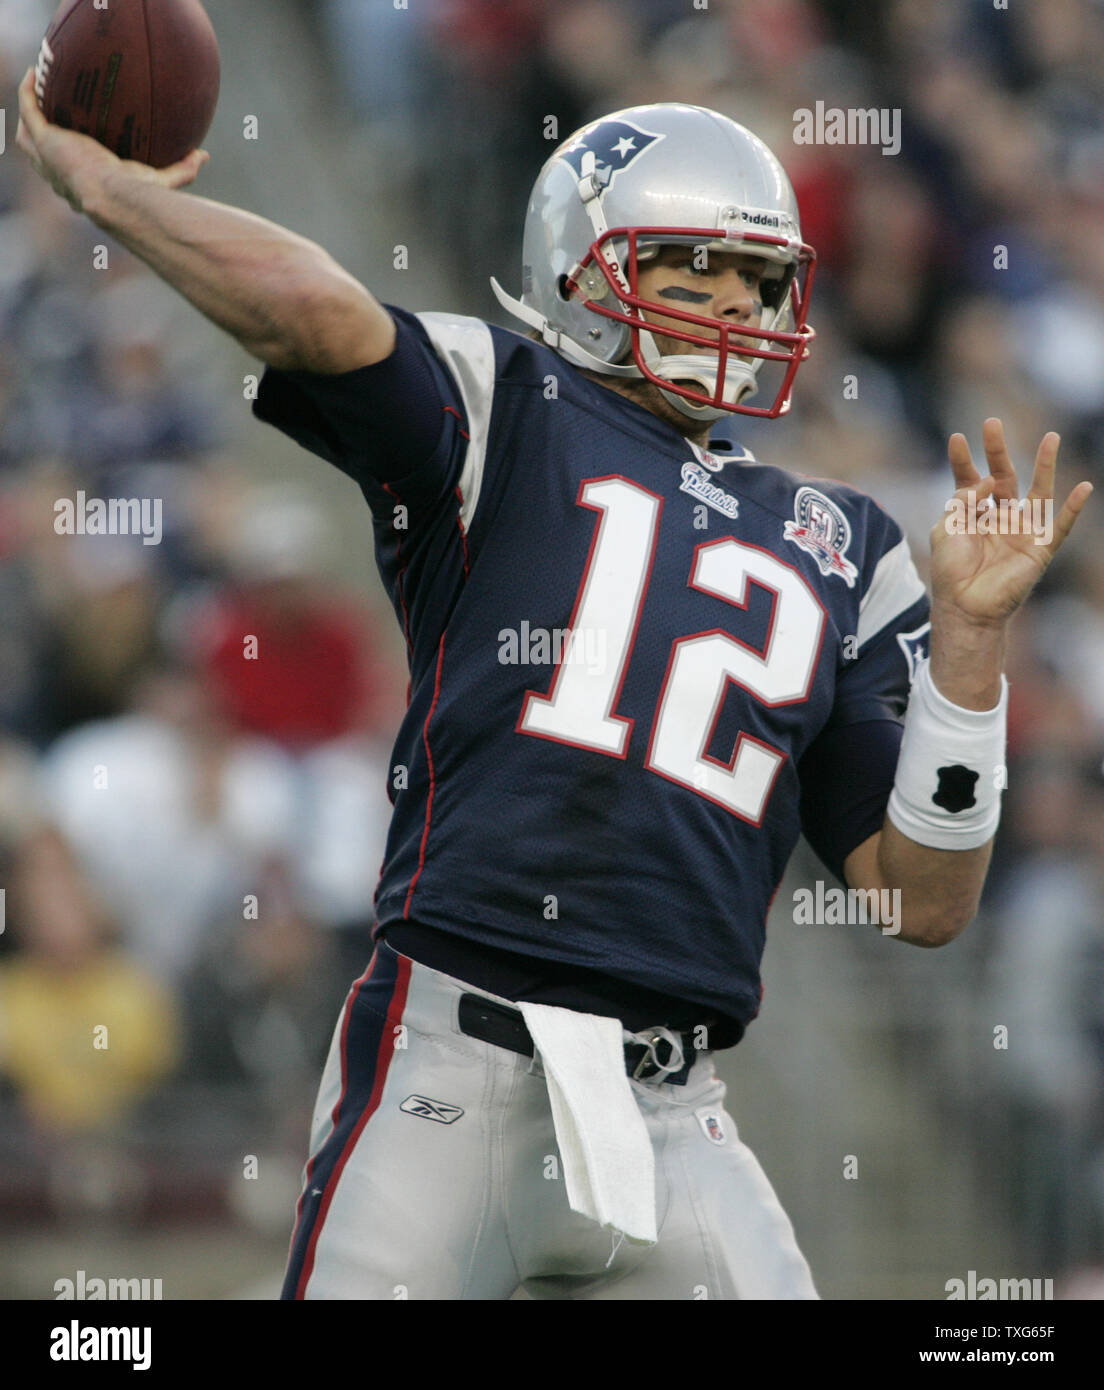 New England Patriots quarterback Tom Brady (12) passes against the Miami Dolphins in the fourth quarter against the Miami Dolphins at Gillette Stadium in Foxboro, Massachusetts on November 8, 2009.  The Patriots defeated the Dolphins 27-17.    UPI/Matthew Healey Stock Photo